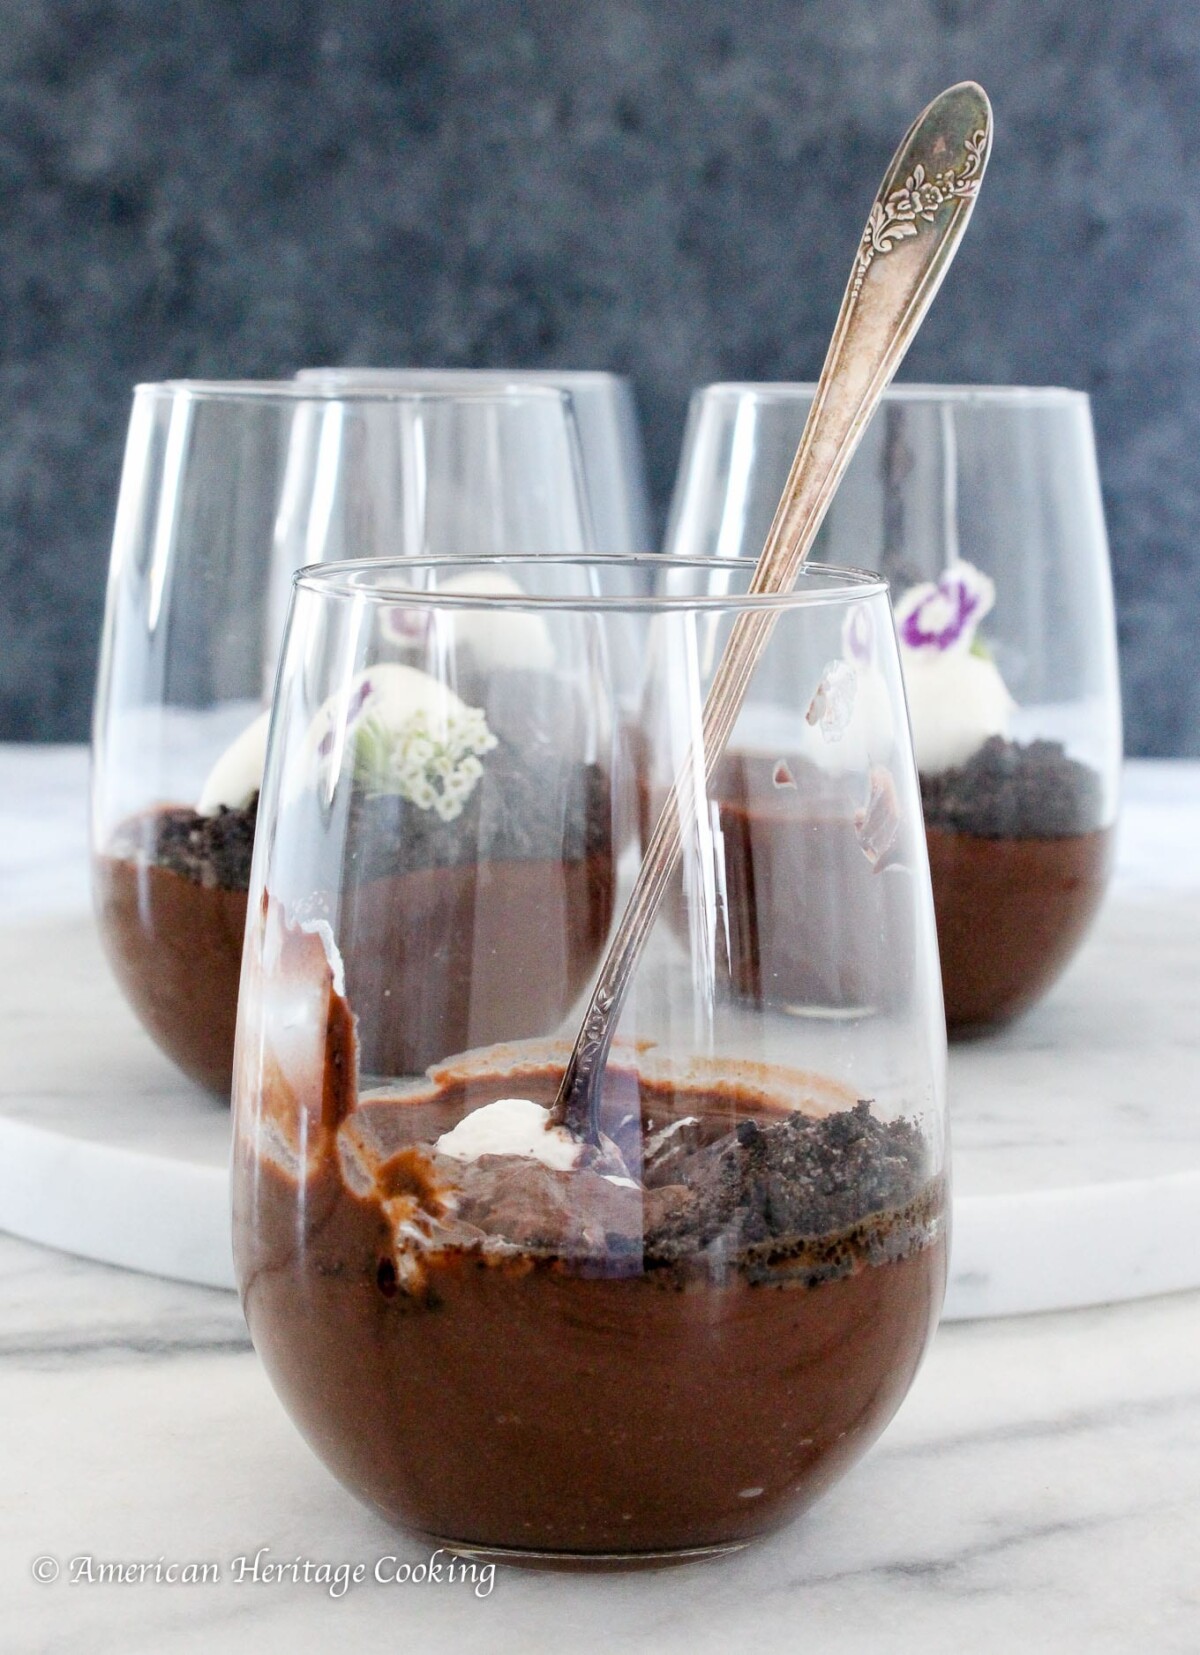 Three clear cups of dark chocolate pudding.